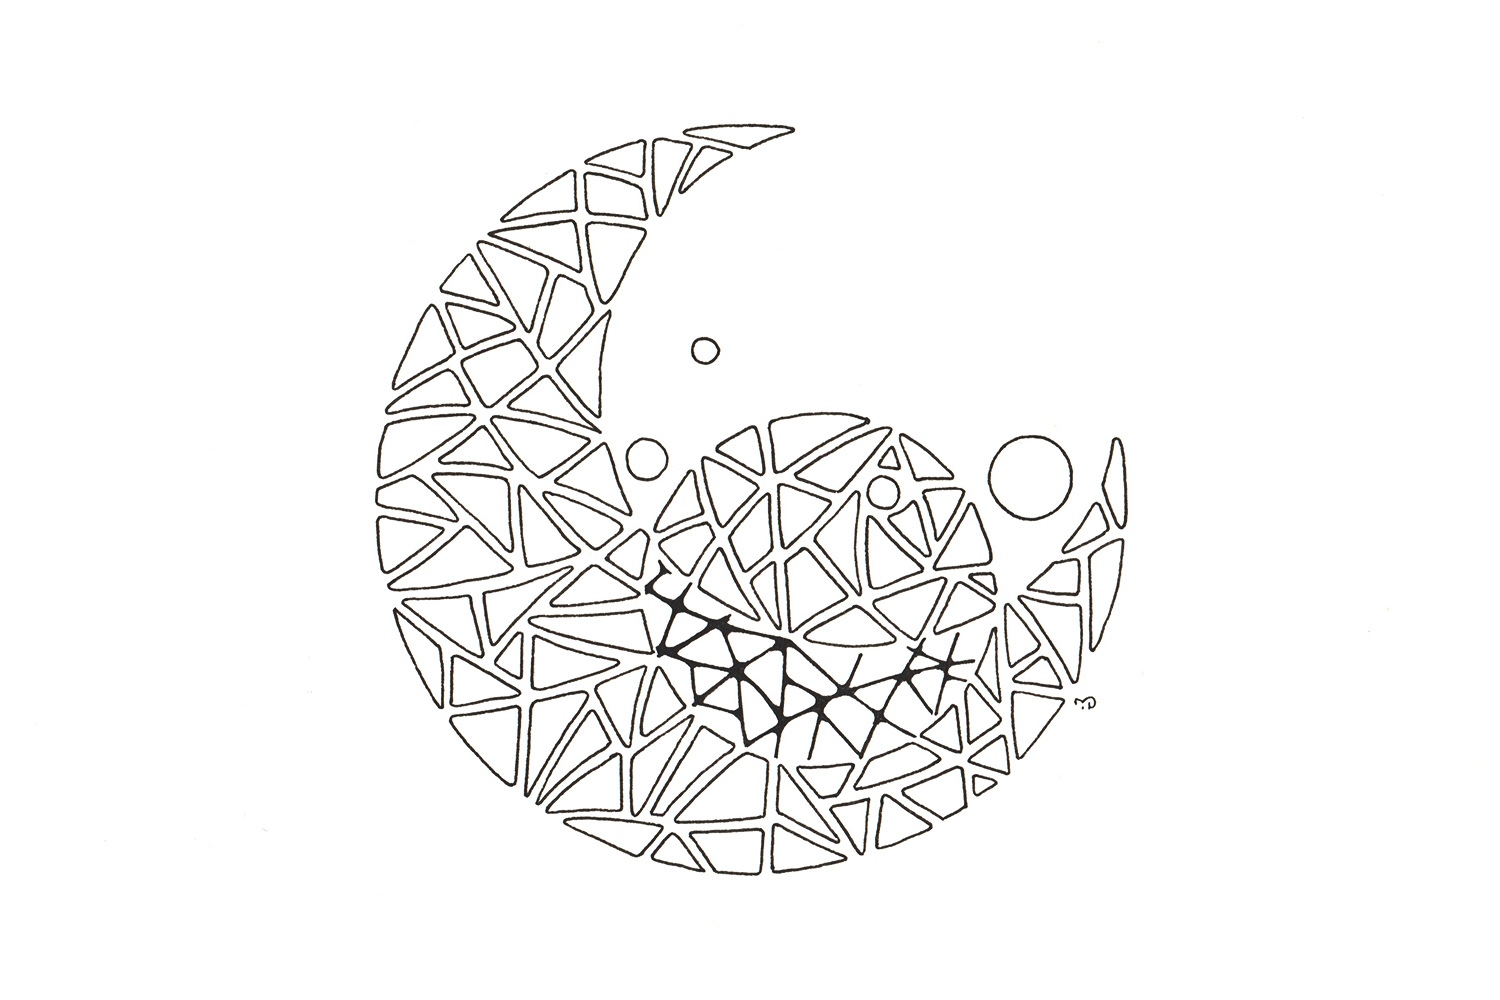 Elated-Complements-moon-pen-drawing-pattern-zentangle-09